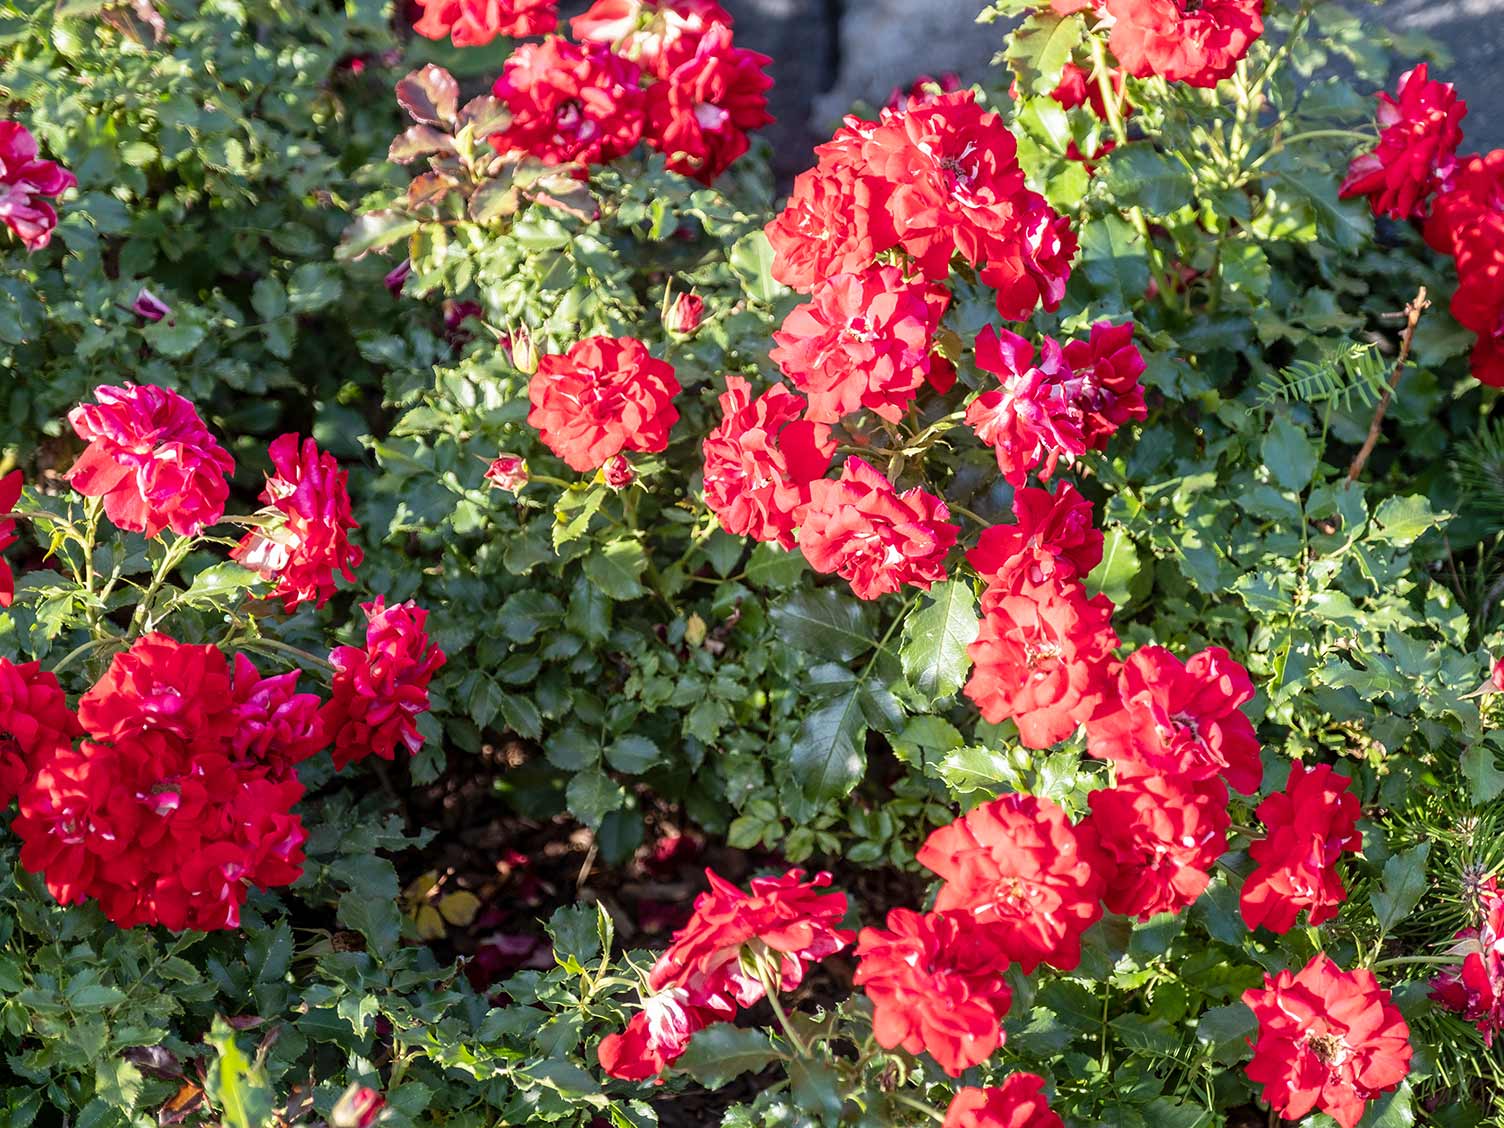 Ground cover roses